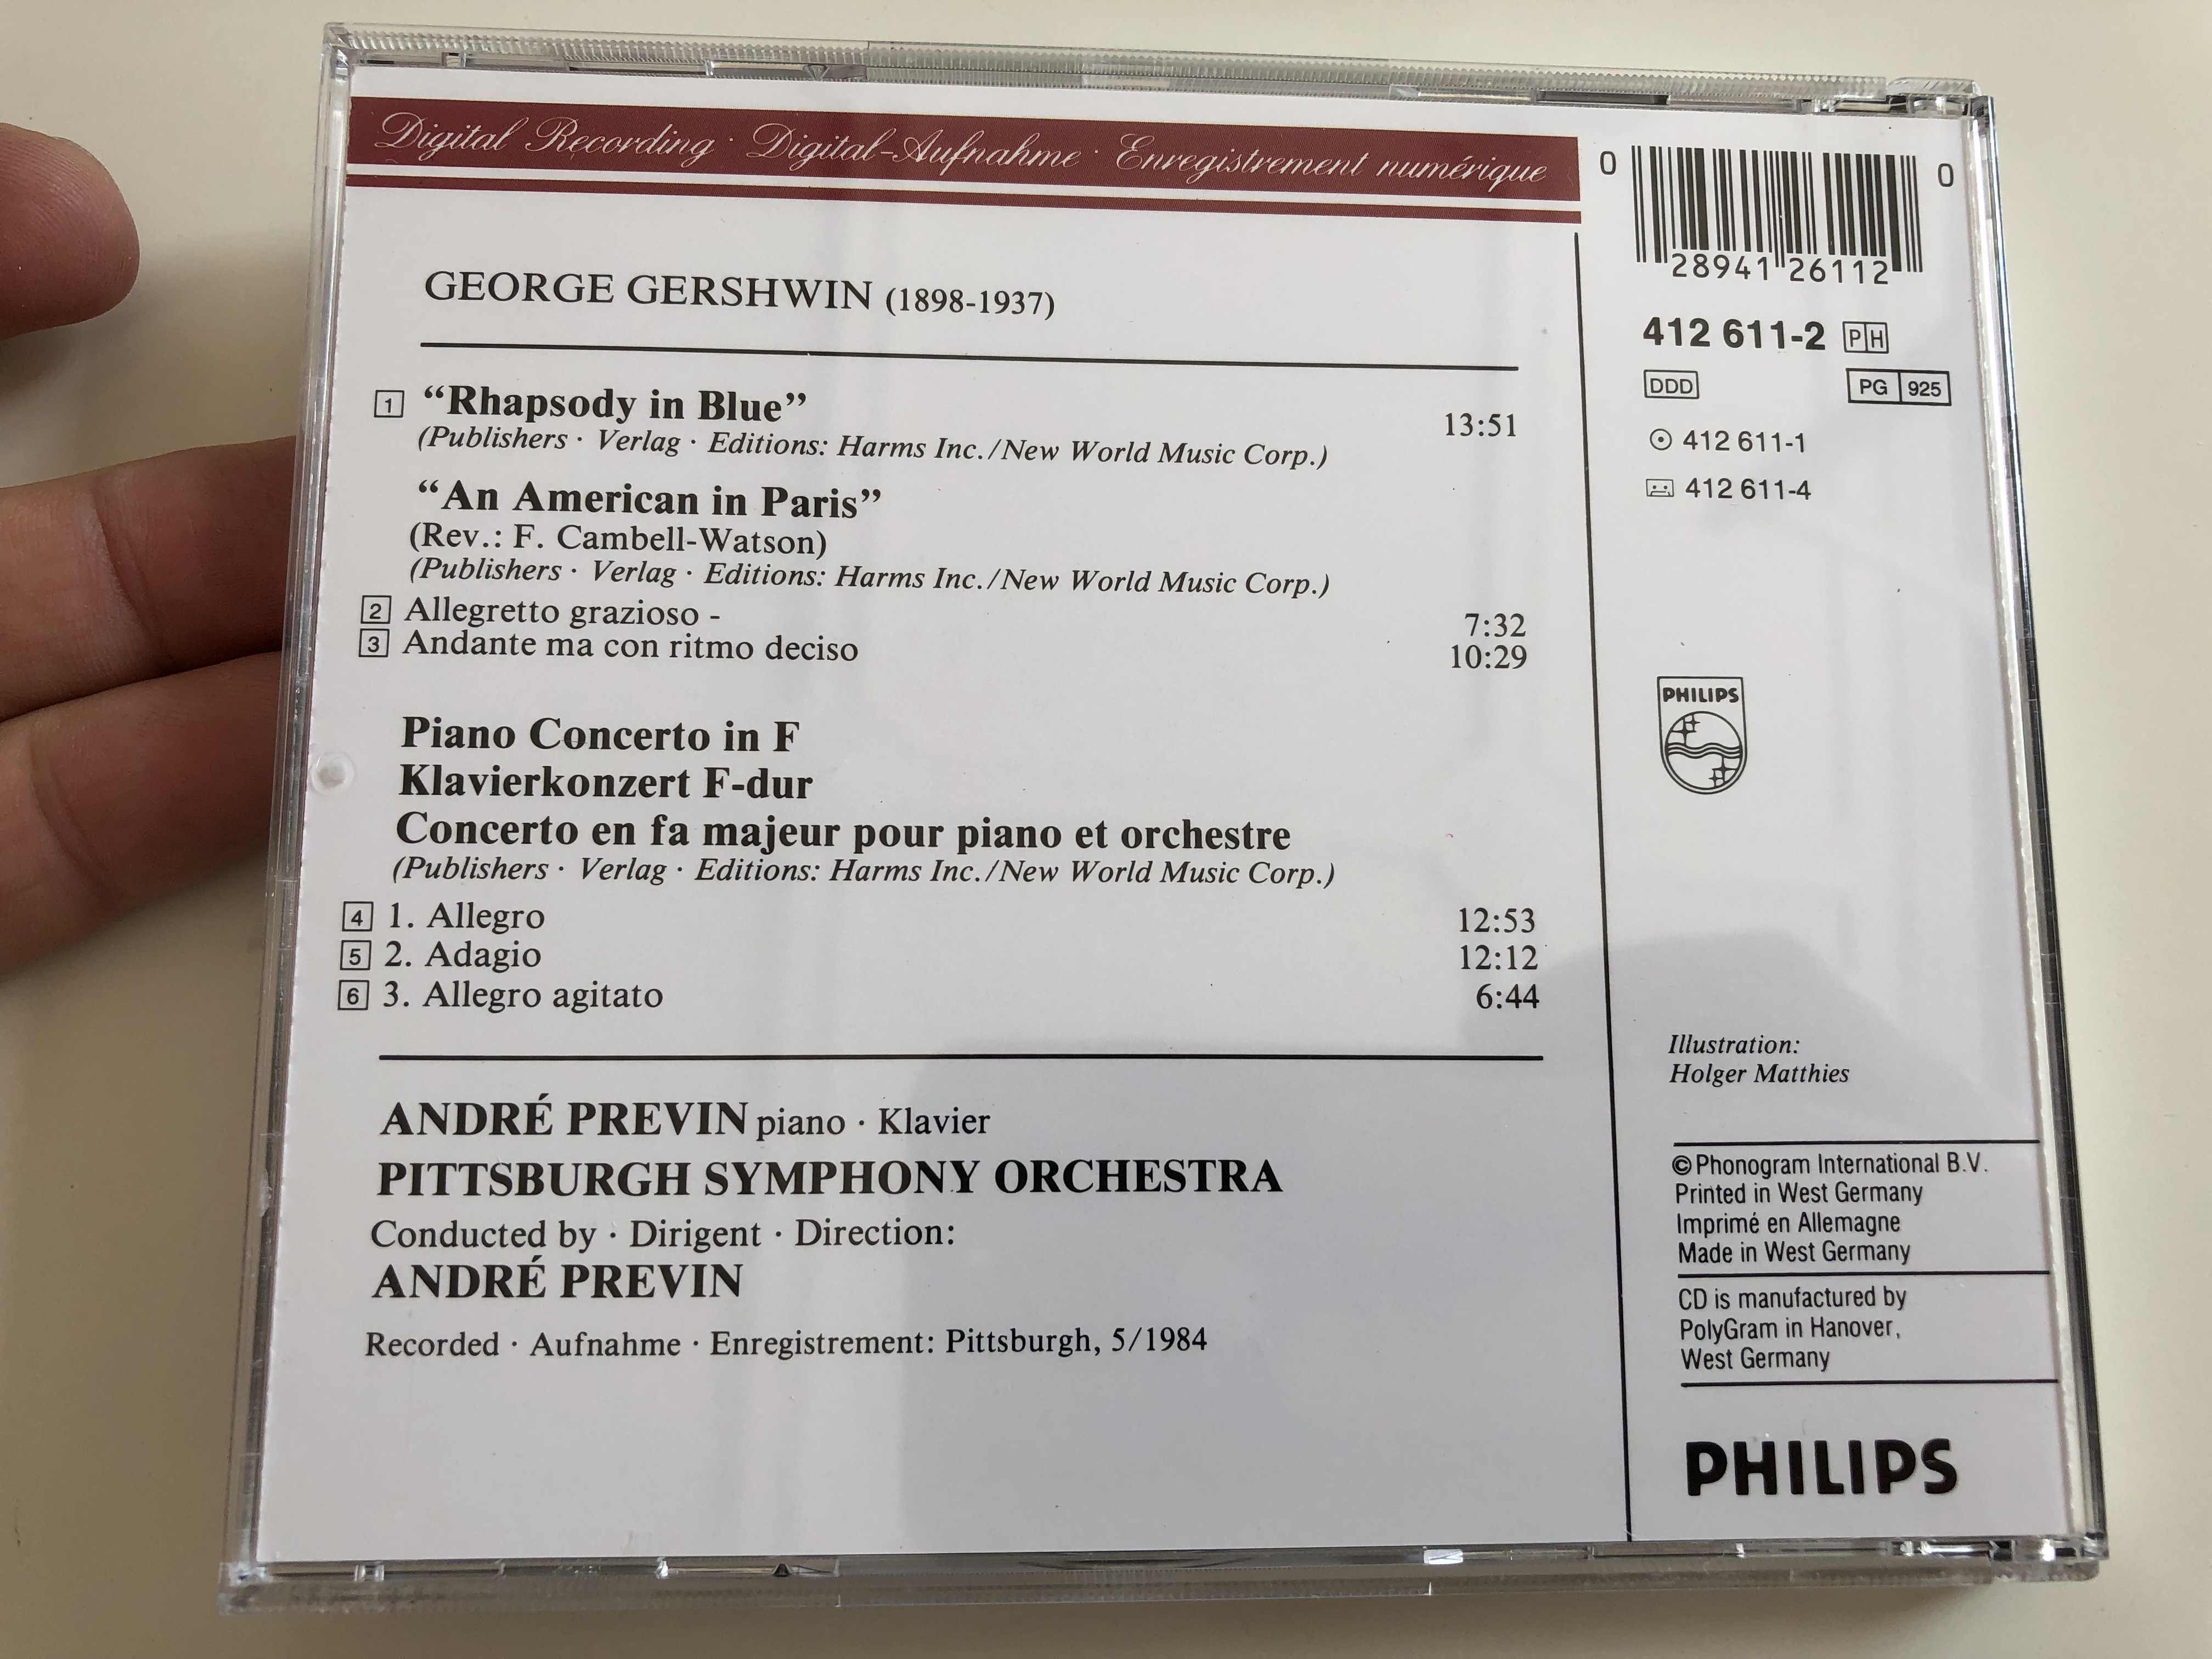 gershwin-rhapsody-in-blue-piano-concerto-in-f-an-american-in-paris-pittsburg-symphony-orchestra-soloist-conductor-andr-previn-philips-digital-classic-audio-cd-1985-412-611-2-4-.jpg